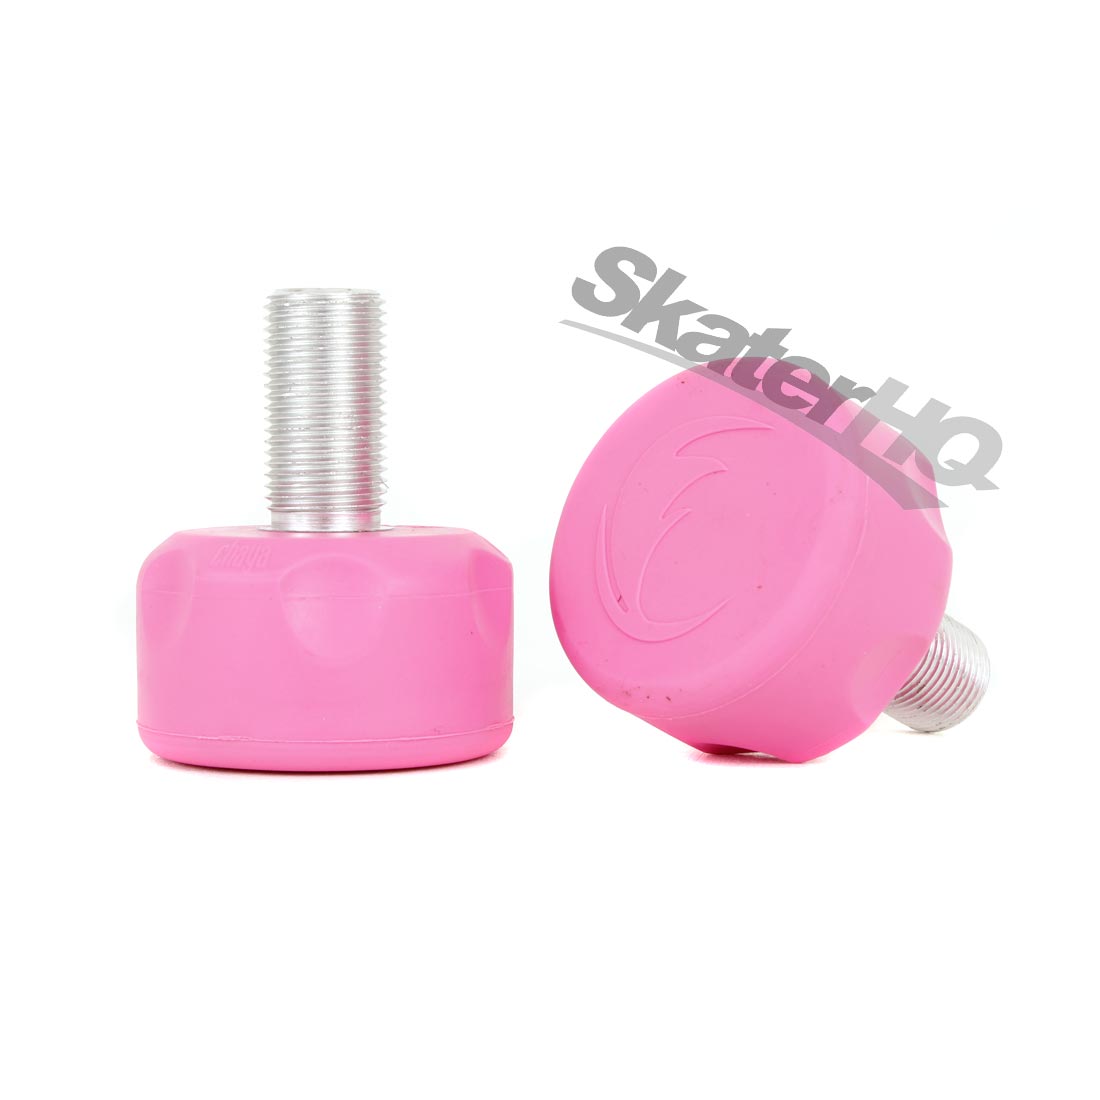 Chaya Cherry Bomb Long Flat Toe Stop - Passion Pink Roller Skate Hardware and Parts